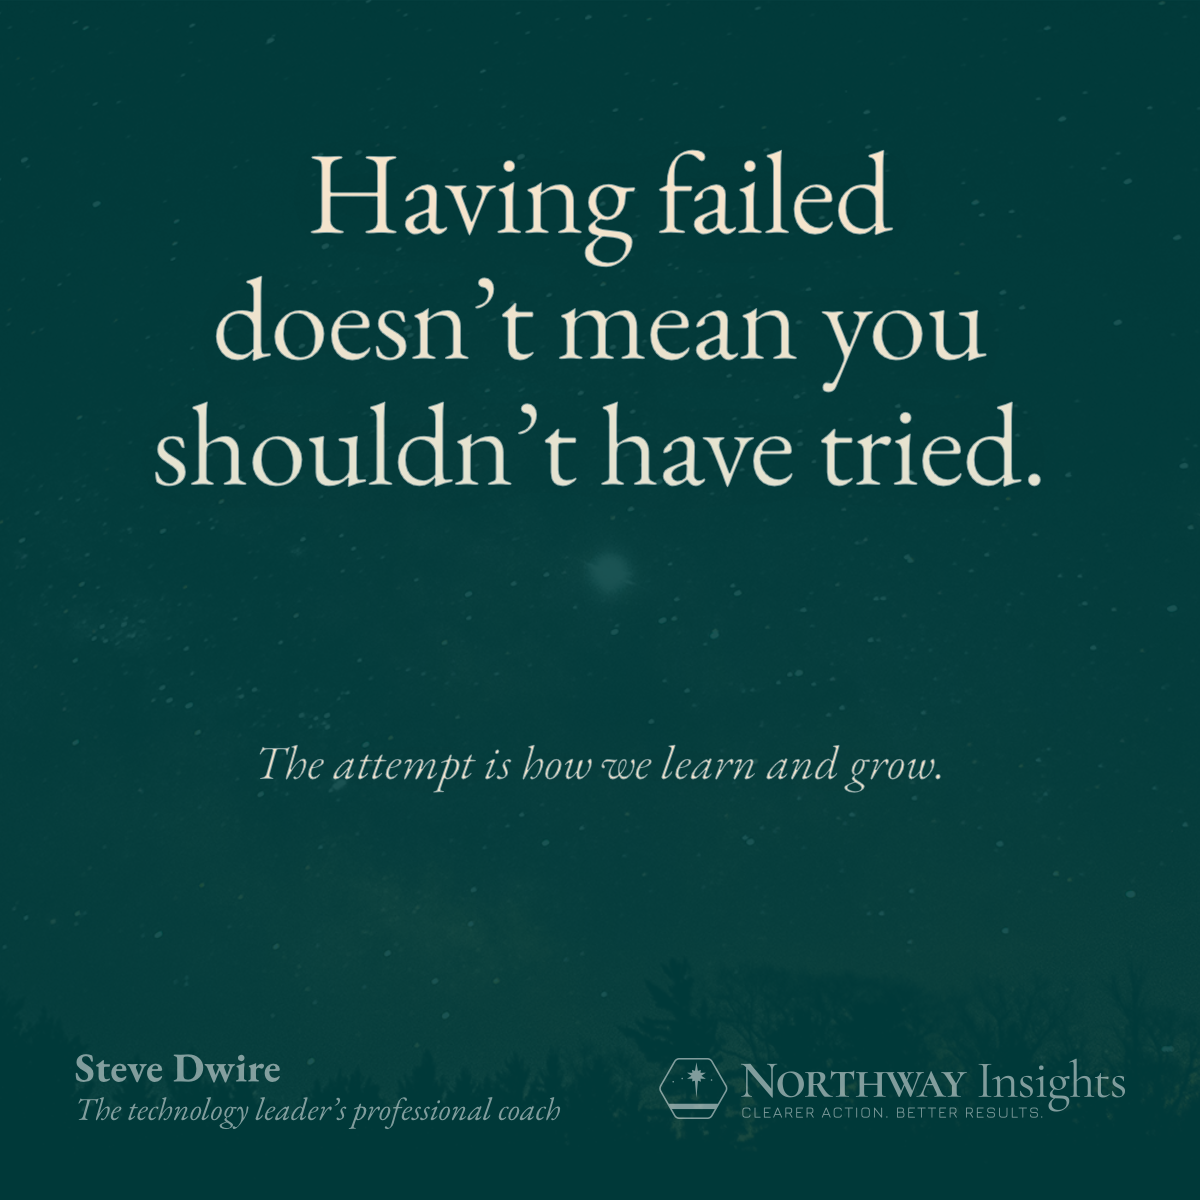 Having failed doesn't mean you shouldn't have tried. (The attempt is how we learn and grow.)